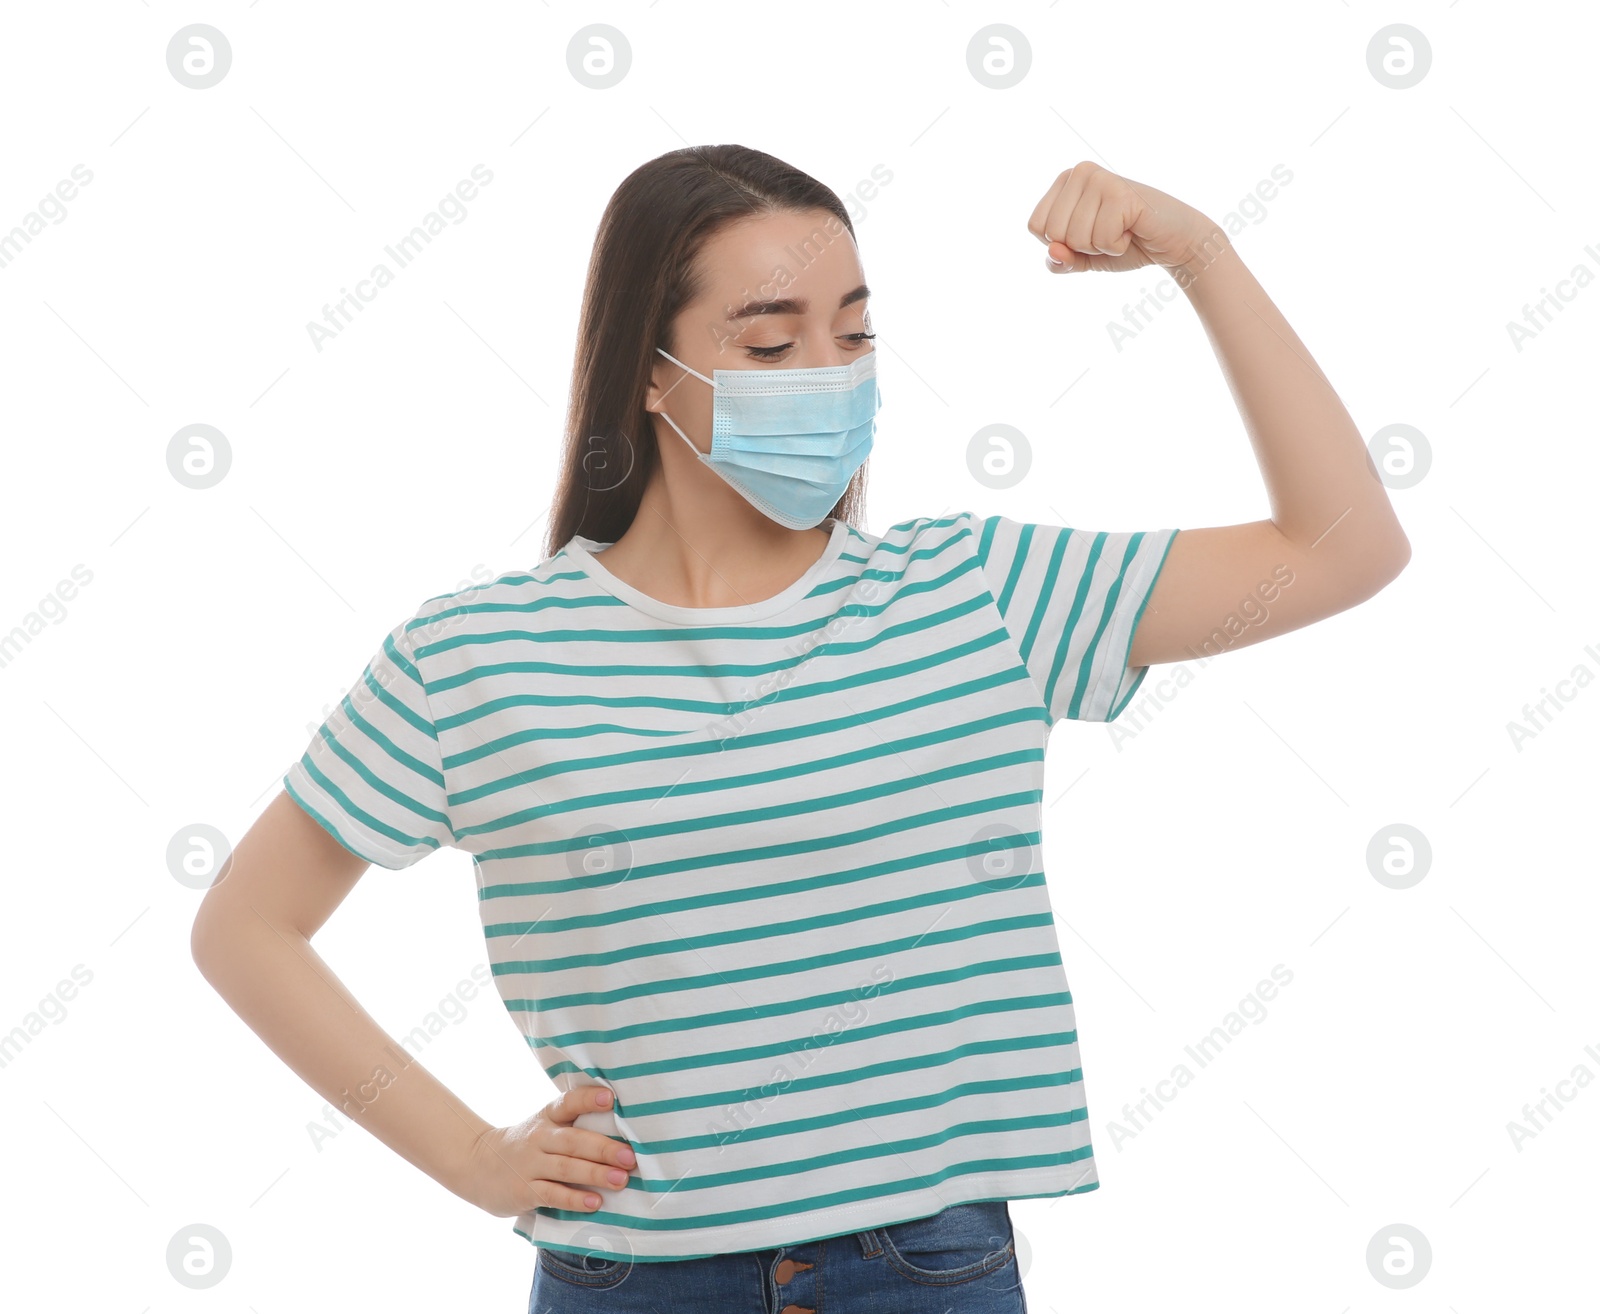 Photo of Woman with protective mask showing muscles on white background. Strong immunity concept